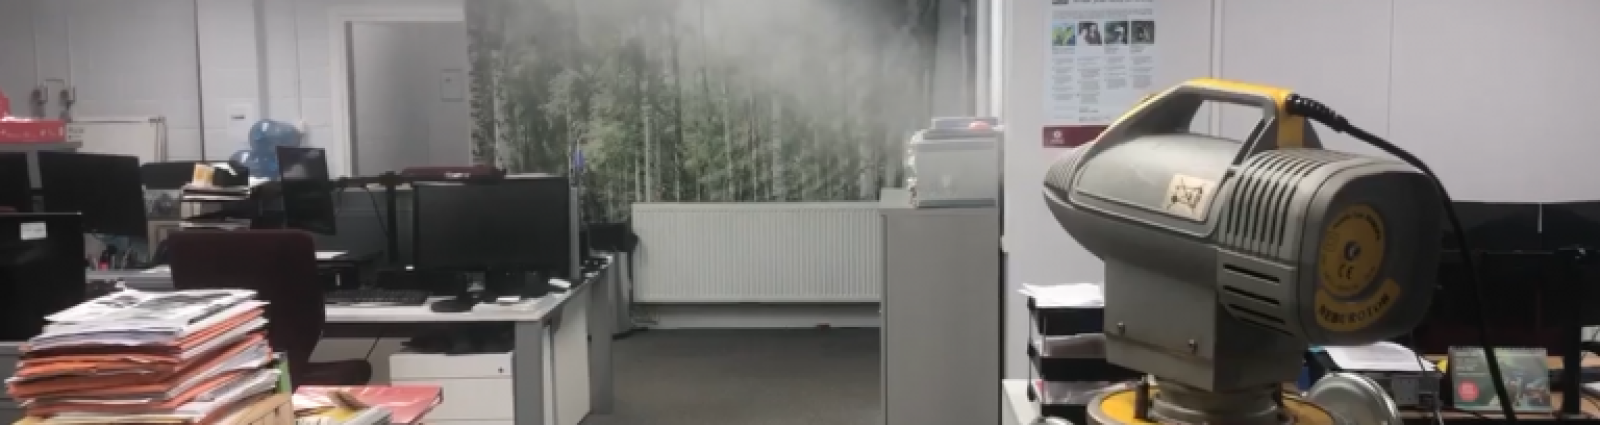 Disinfection fogging service in office building